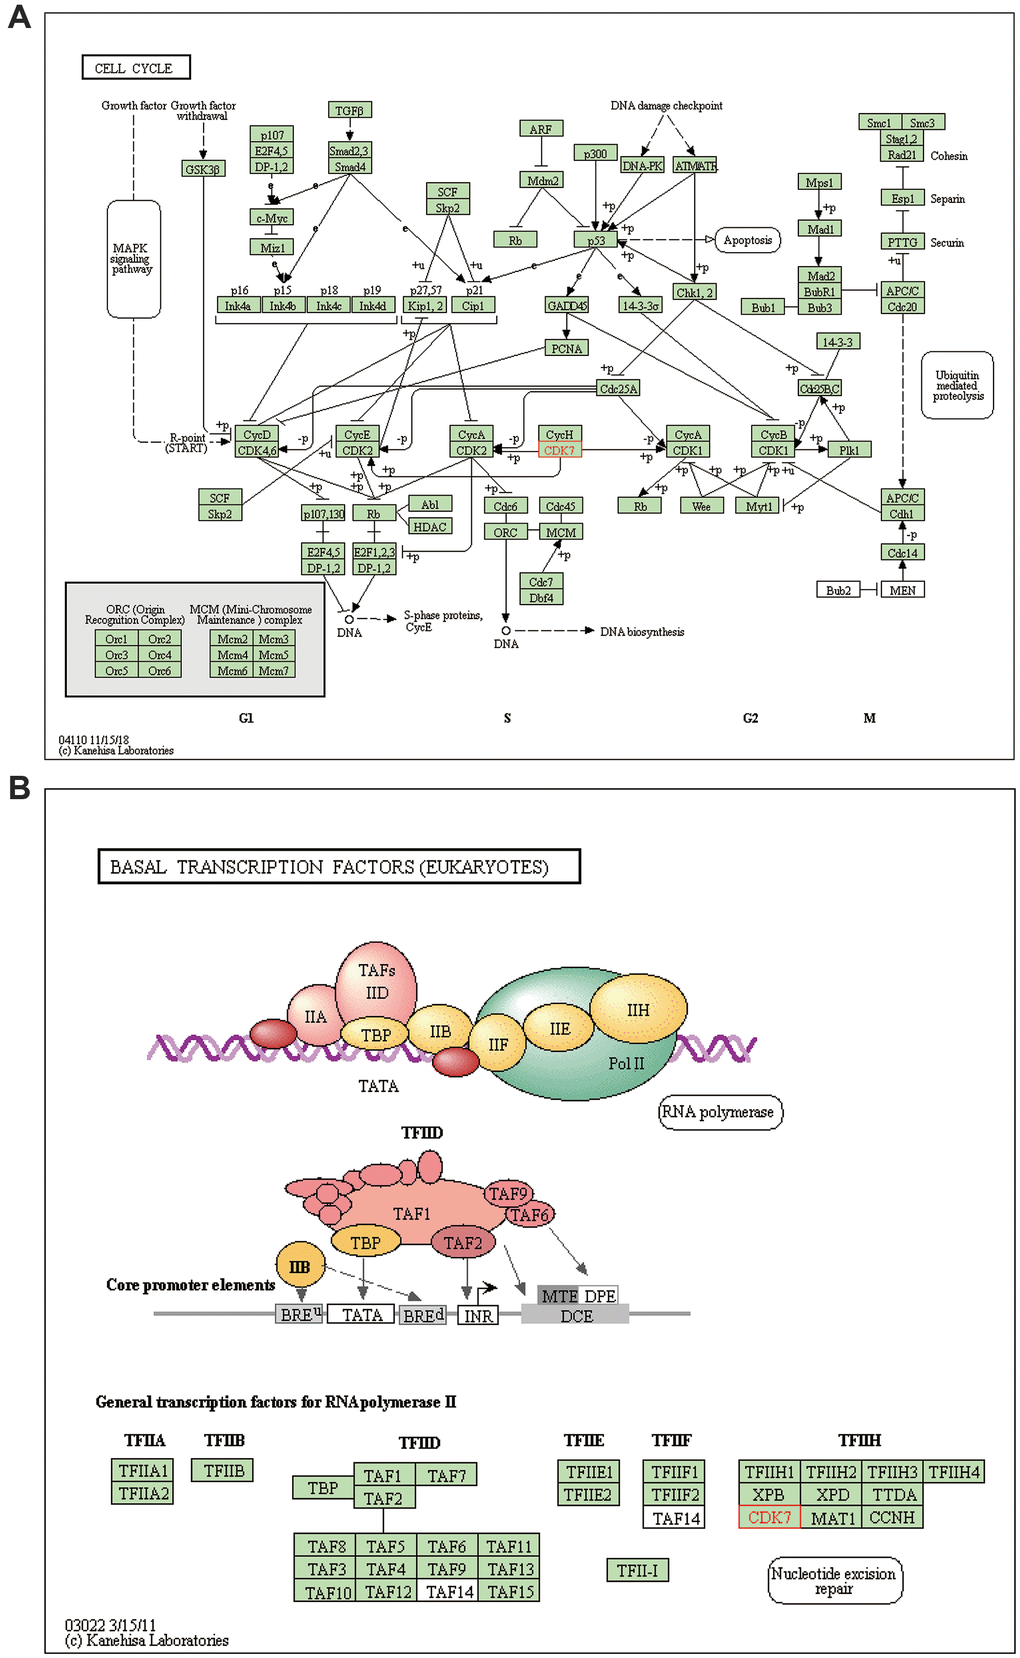 Regulatory actions of TA-CDKs in breast cancer. (A) Cell cycle processes/pathways. (B) Pathways involving basal transcription factors.